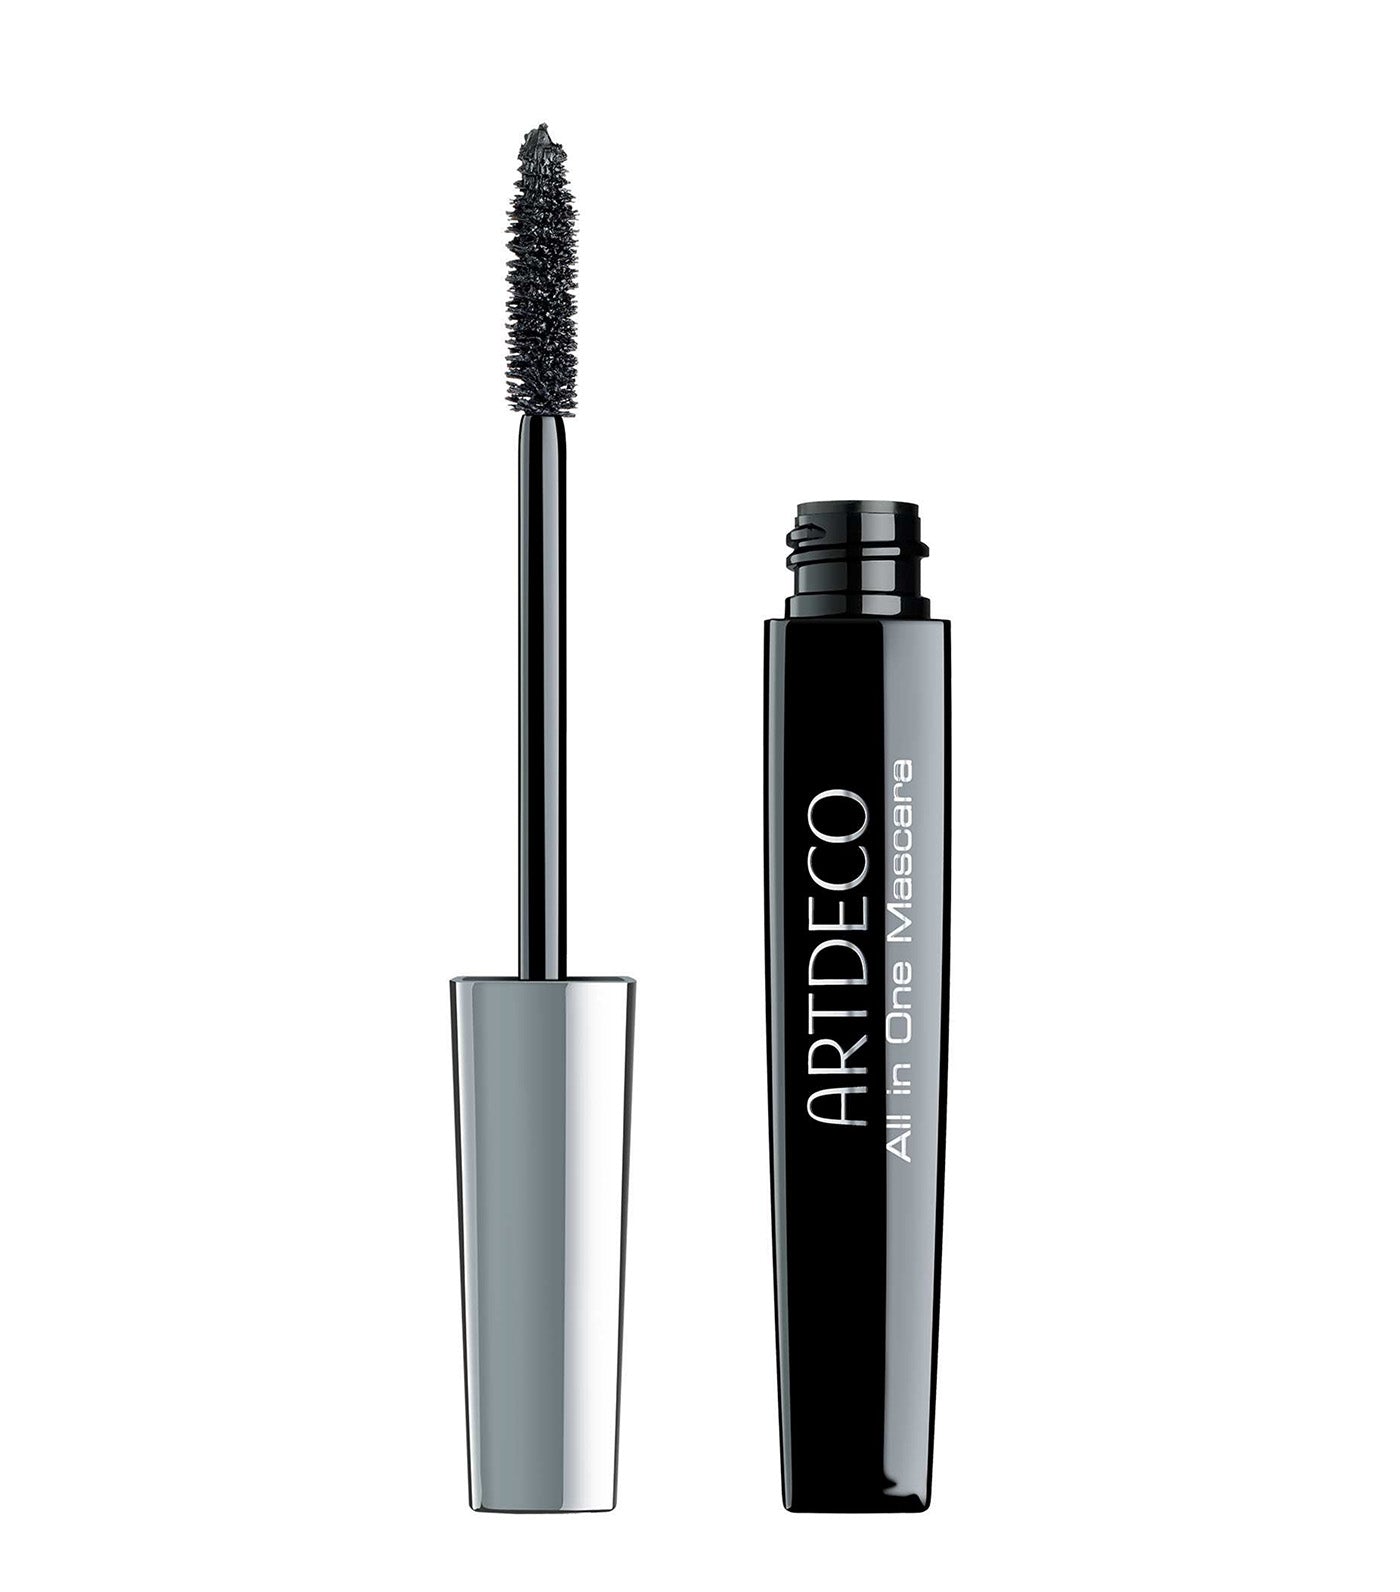 All In One Mascara